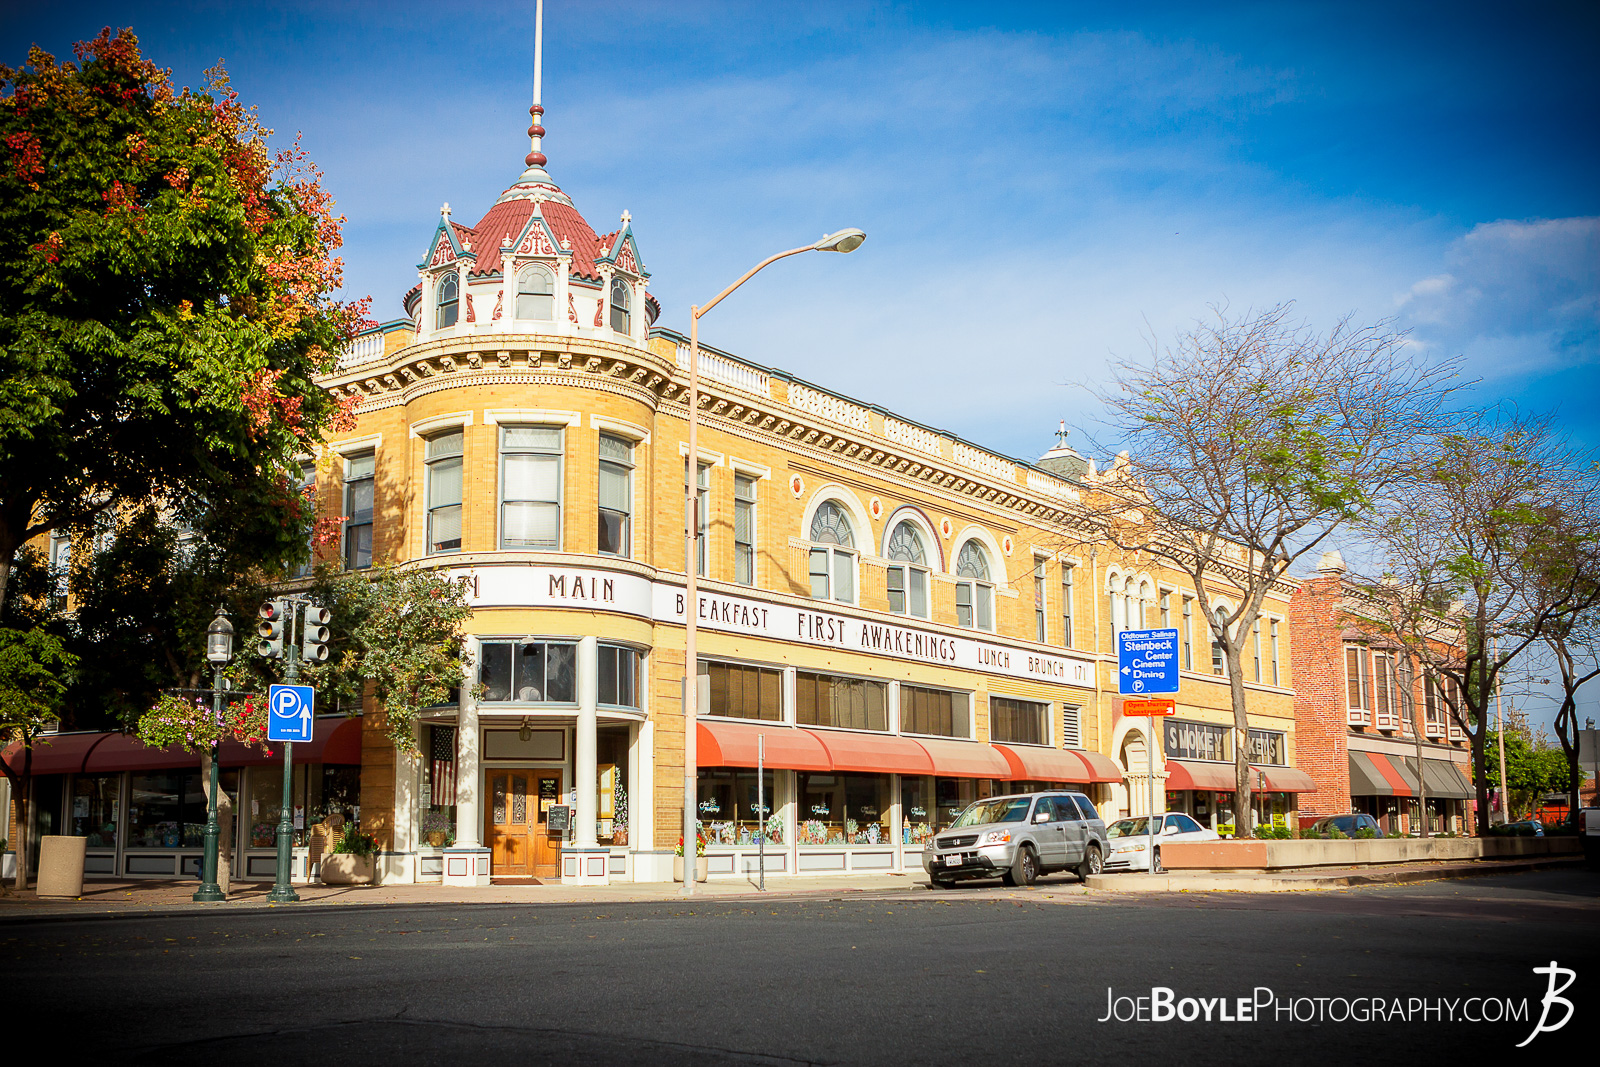  Here is a photo of Oldtown Salinas on 171 Main Street. I really loved the old time look and architecture. Seems like a fun place to have breakfast with a friend! 